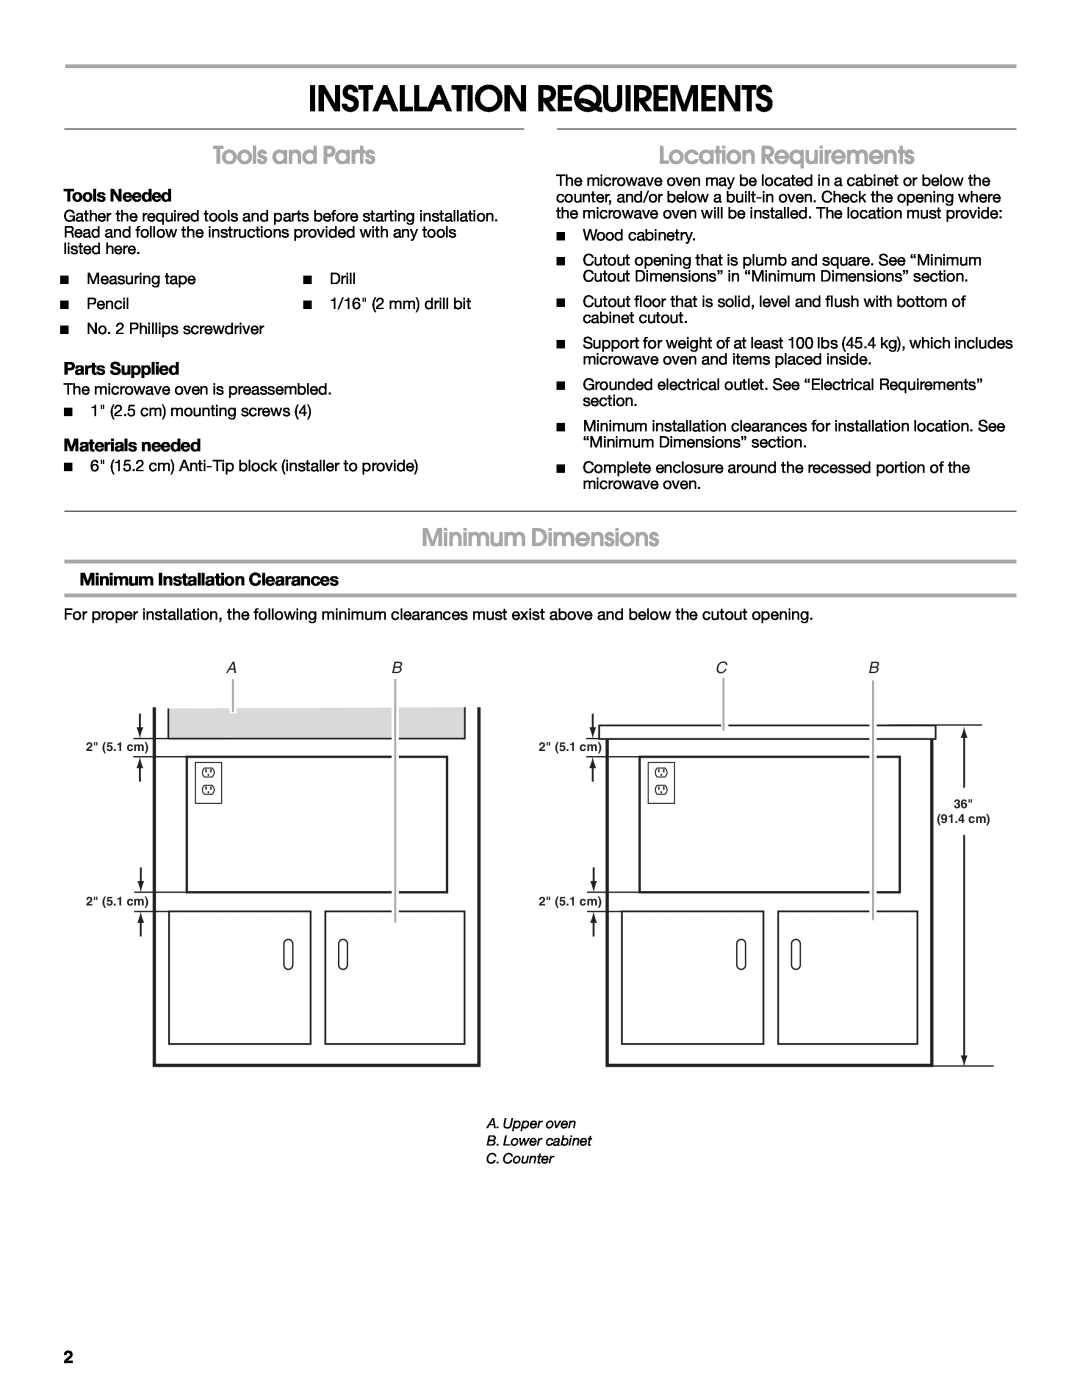 Whirlpool W10531851A Installation Requirements, Tools and Parts, Location Requirements, Minimum Dimensions, Tools Needed 